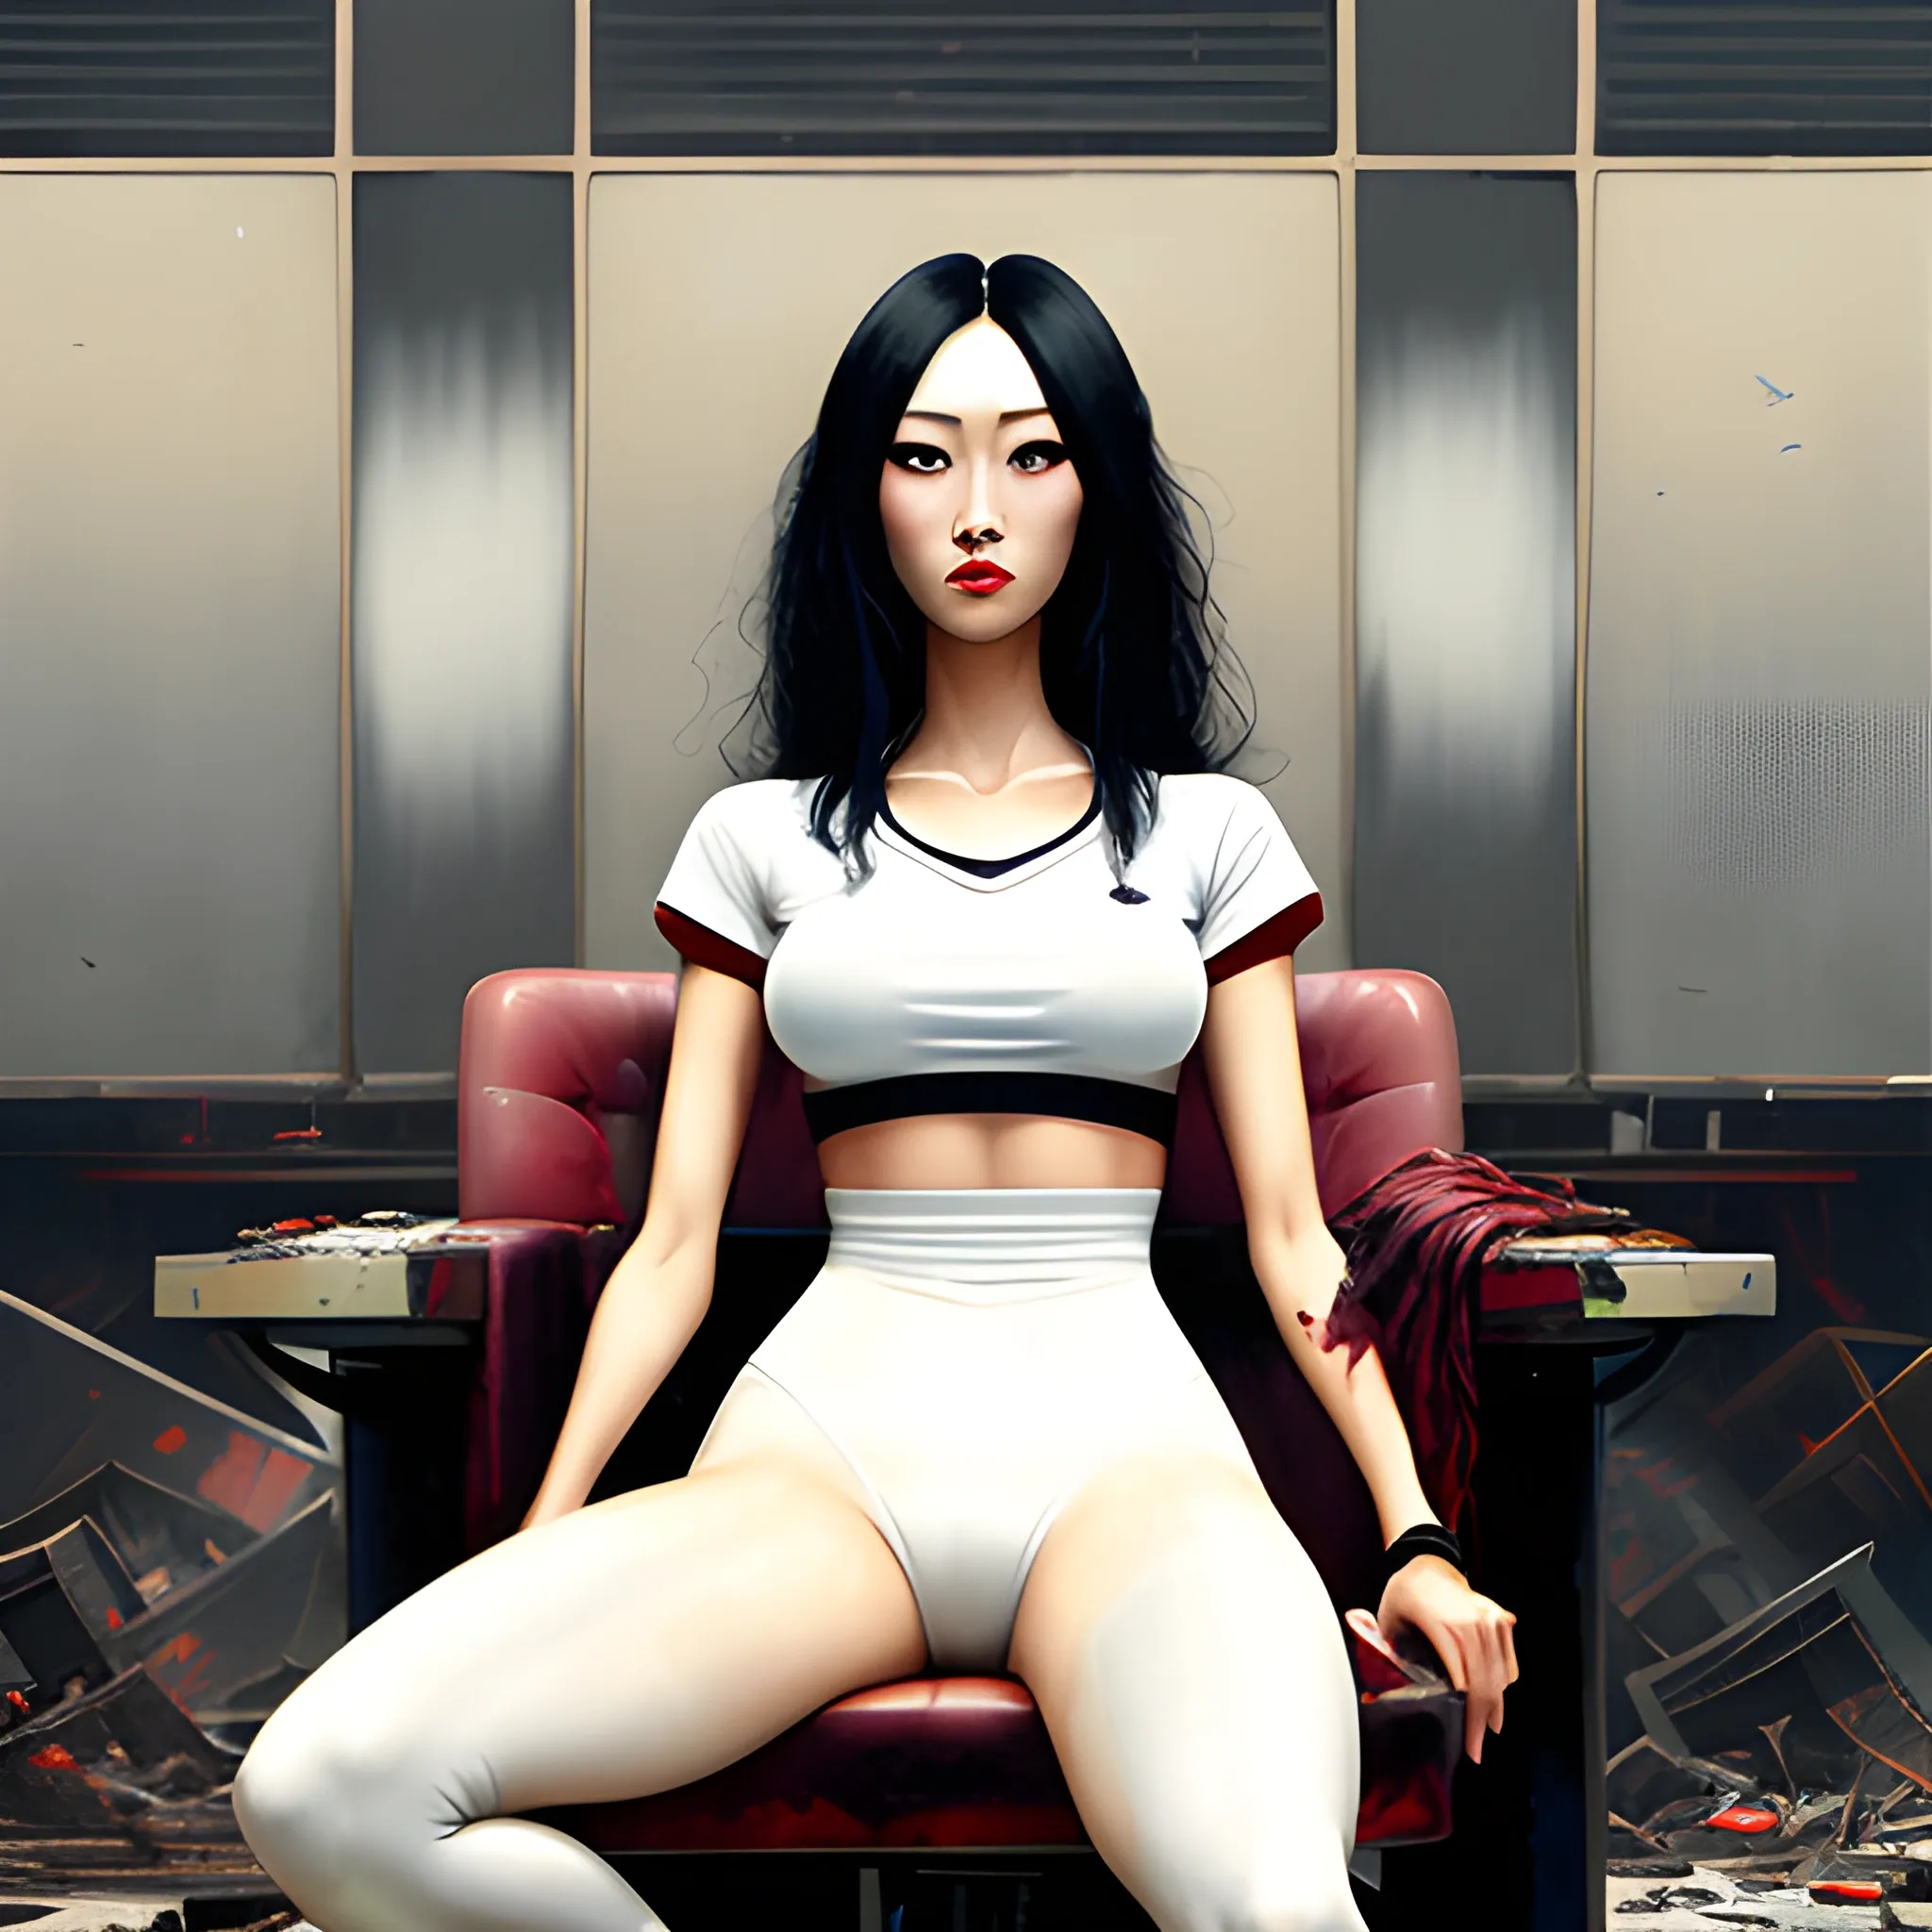 dark painting, intensive colors,  casual fashion shot of   korean cheap damsel in distress, wearing tights , cameltoe, longhaired, symmetric face, manga eyes,  full figure, fit,  tight white shirt, legs, knees, high heels, sitting on the chair in the demolished class, school, revenge, sinister art by Greg Rutkowski, Oil Painting